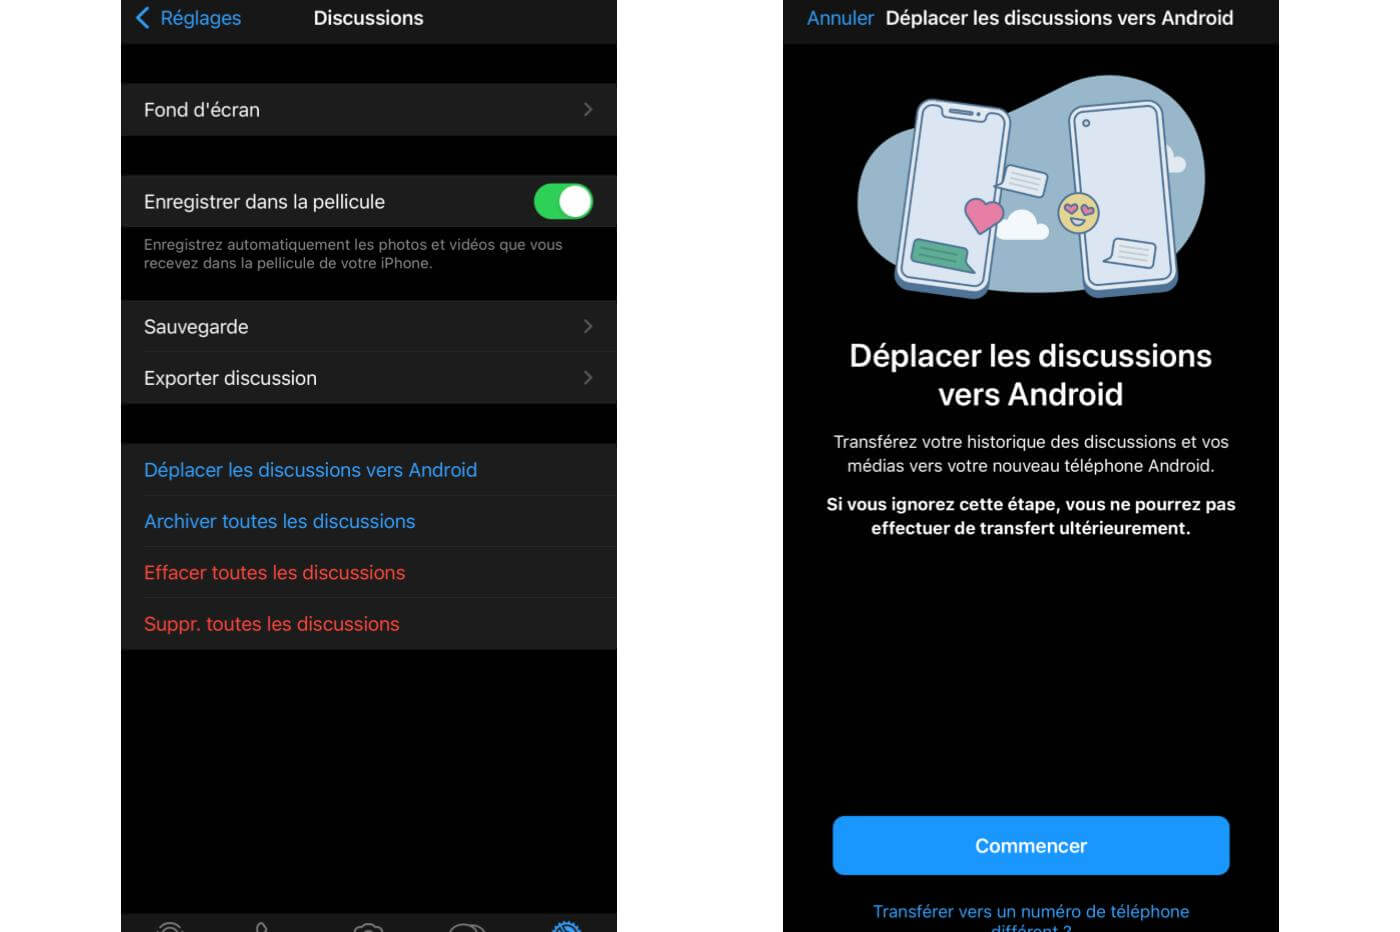 Déplacer les discussions vers Android